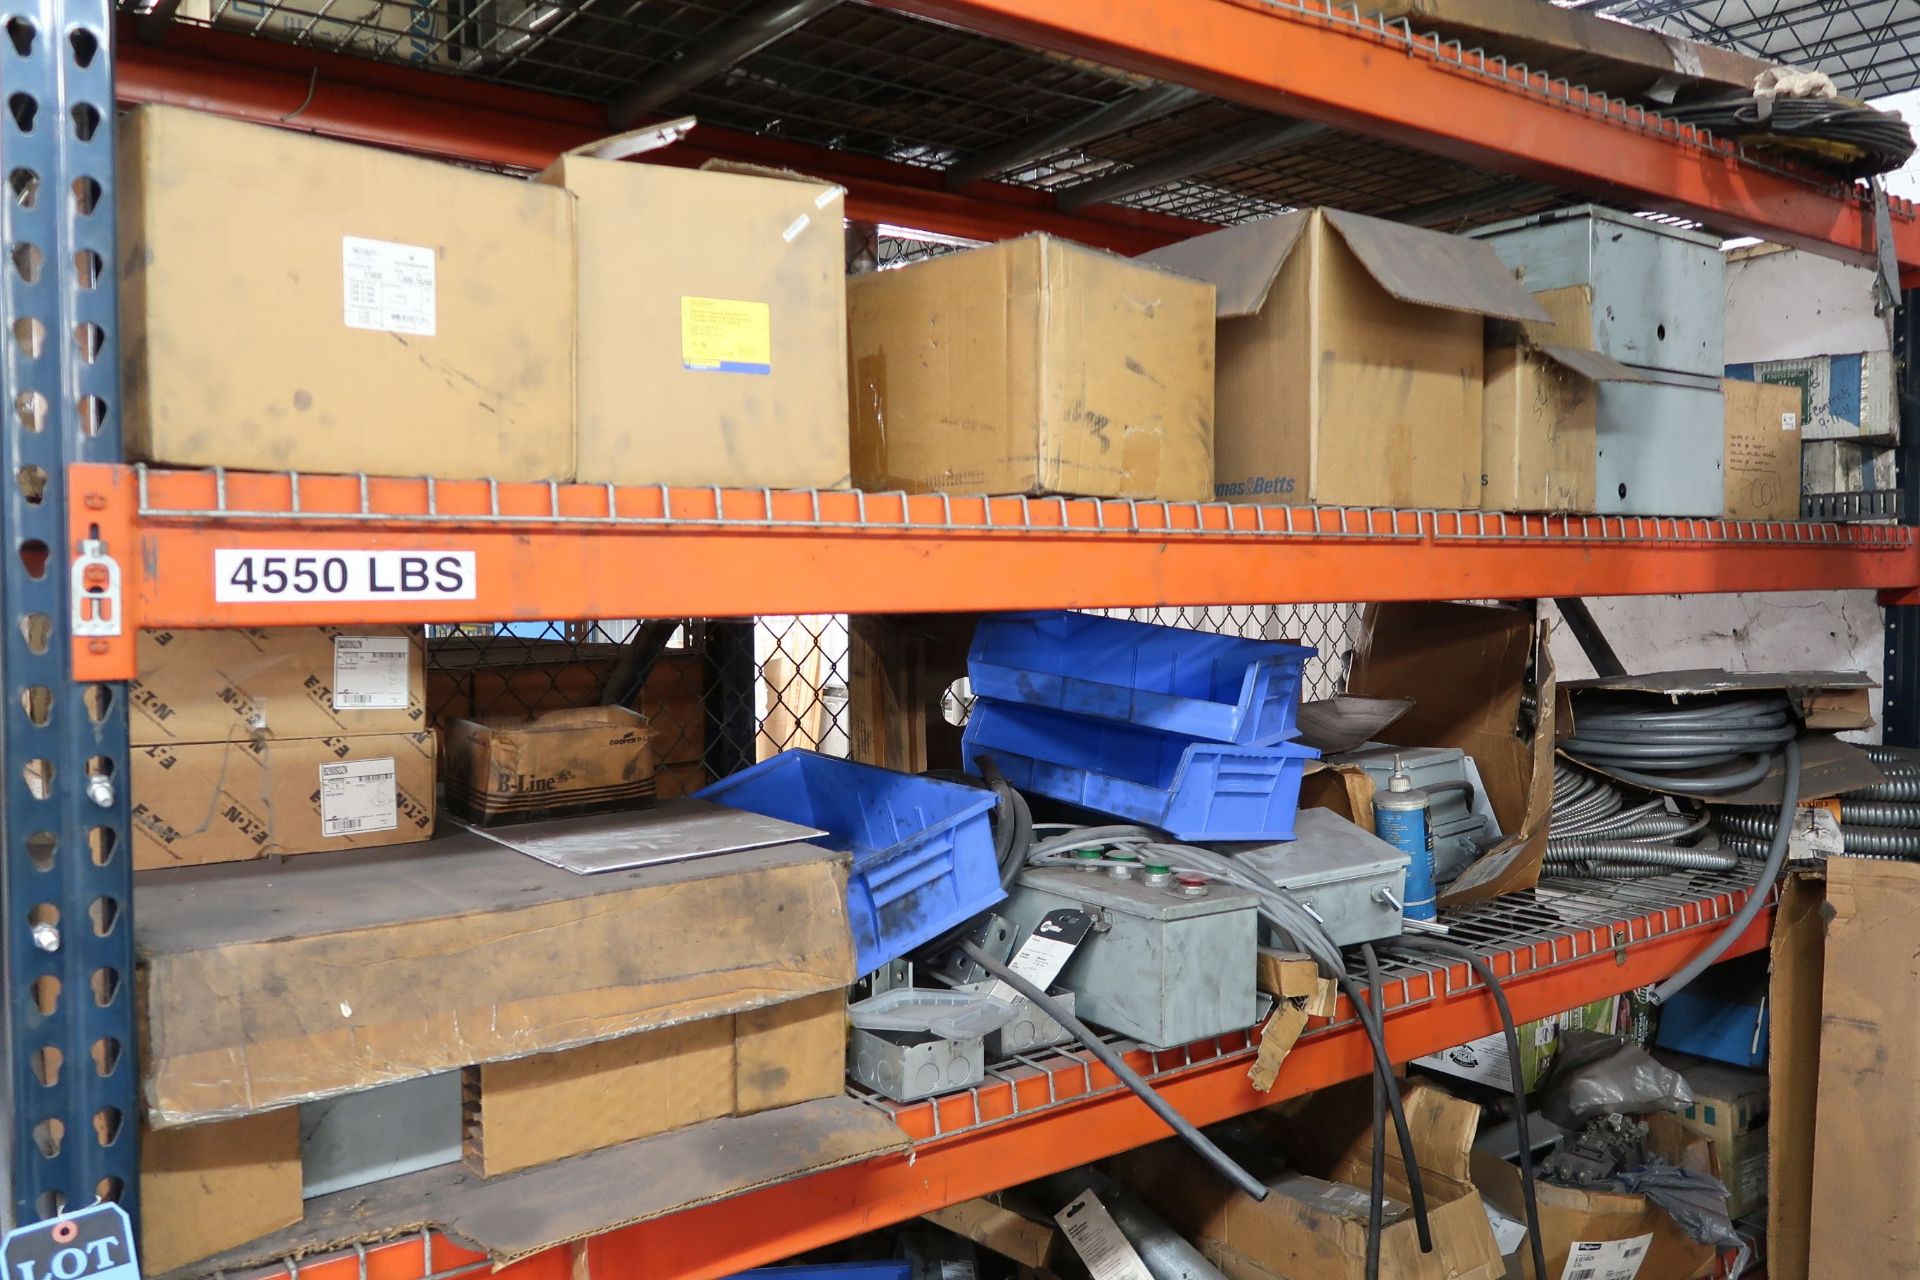 (LOT) CABINETS AND RACKS WITH MAINTENANCE SUPPLIES UNDER STEP **LOADING PRICE DUE TO ERRA - $1,500. - Image 4 of 15